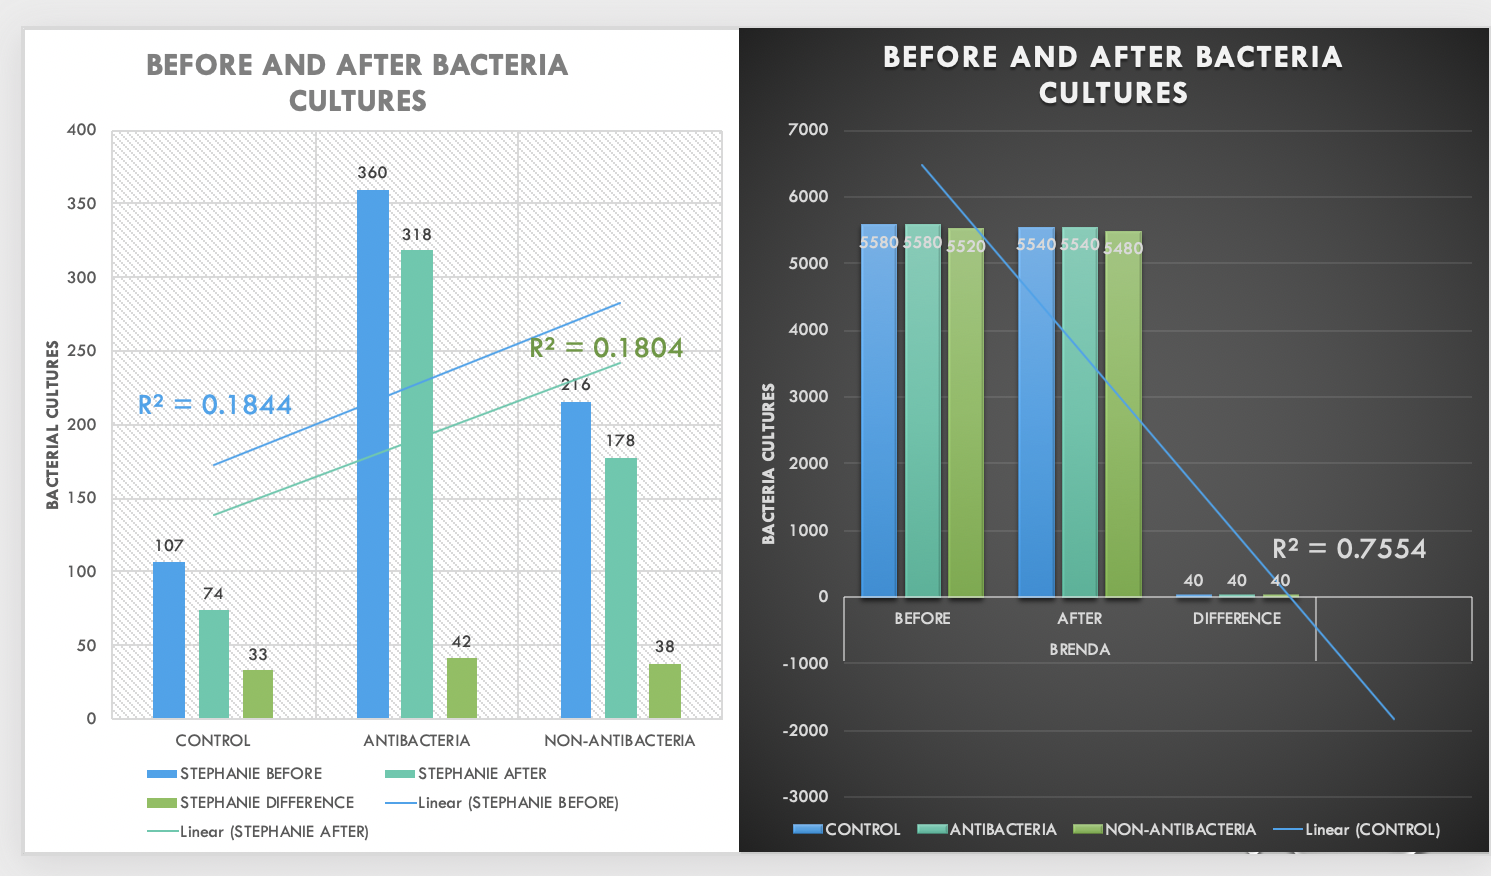 BEFORE AND AFTER BACTERIA
BEFORE AND AFTER BACTERIA
CULTURES
CULTURES
400
7000
360
6000
350
318
5580 5580 5520
5540 5540 5480
5000
300
4000
R2 = 0.1804
250
216
R2 = 0.1844
3000
200
178
2000
150
1000
R2
0.7554
107
100
40
40
40
74
BEFORE
AFTER
DIFFERENCE
42
50
38
BRENDA
33
-1000
-2000
CONTROL
ANTIBACTERIA
NON-ANTIBACTERIA
STEPHANIE BEFORE
STEPHANIE AFTER
-3000
STEPHANIE DI FFER ENCE
Linear (STEPHANIE BEFORE)
CONTROL
Linear (CONTROL)
ANTI BACTERIA
Linear (STEPHANIE AFTER)
NON-ANTIBACTERIA
